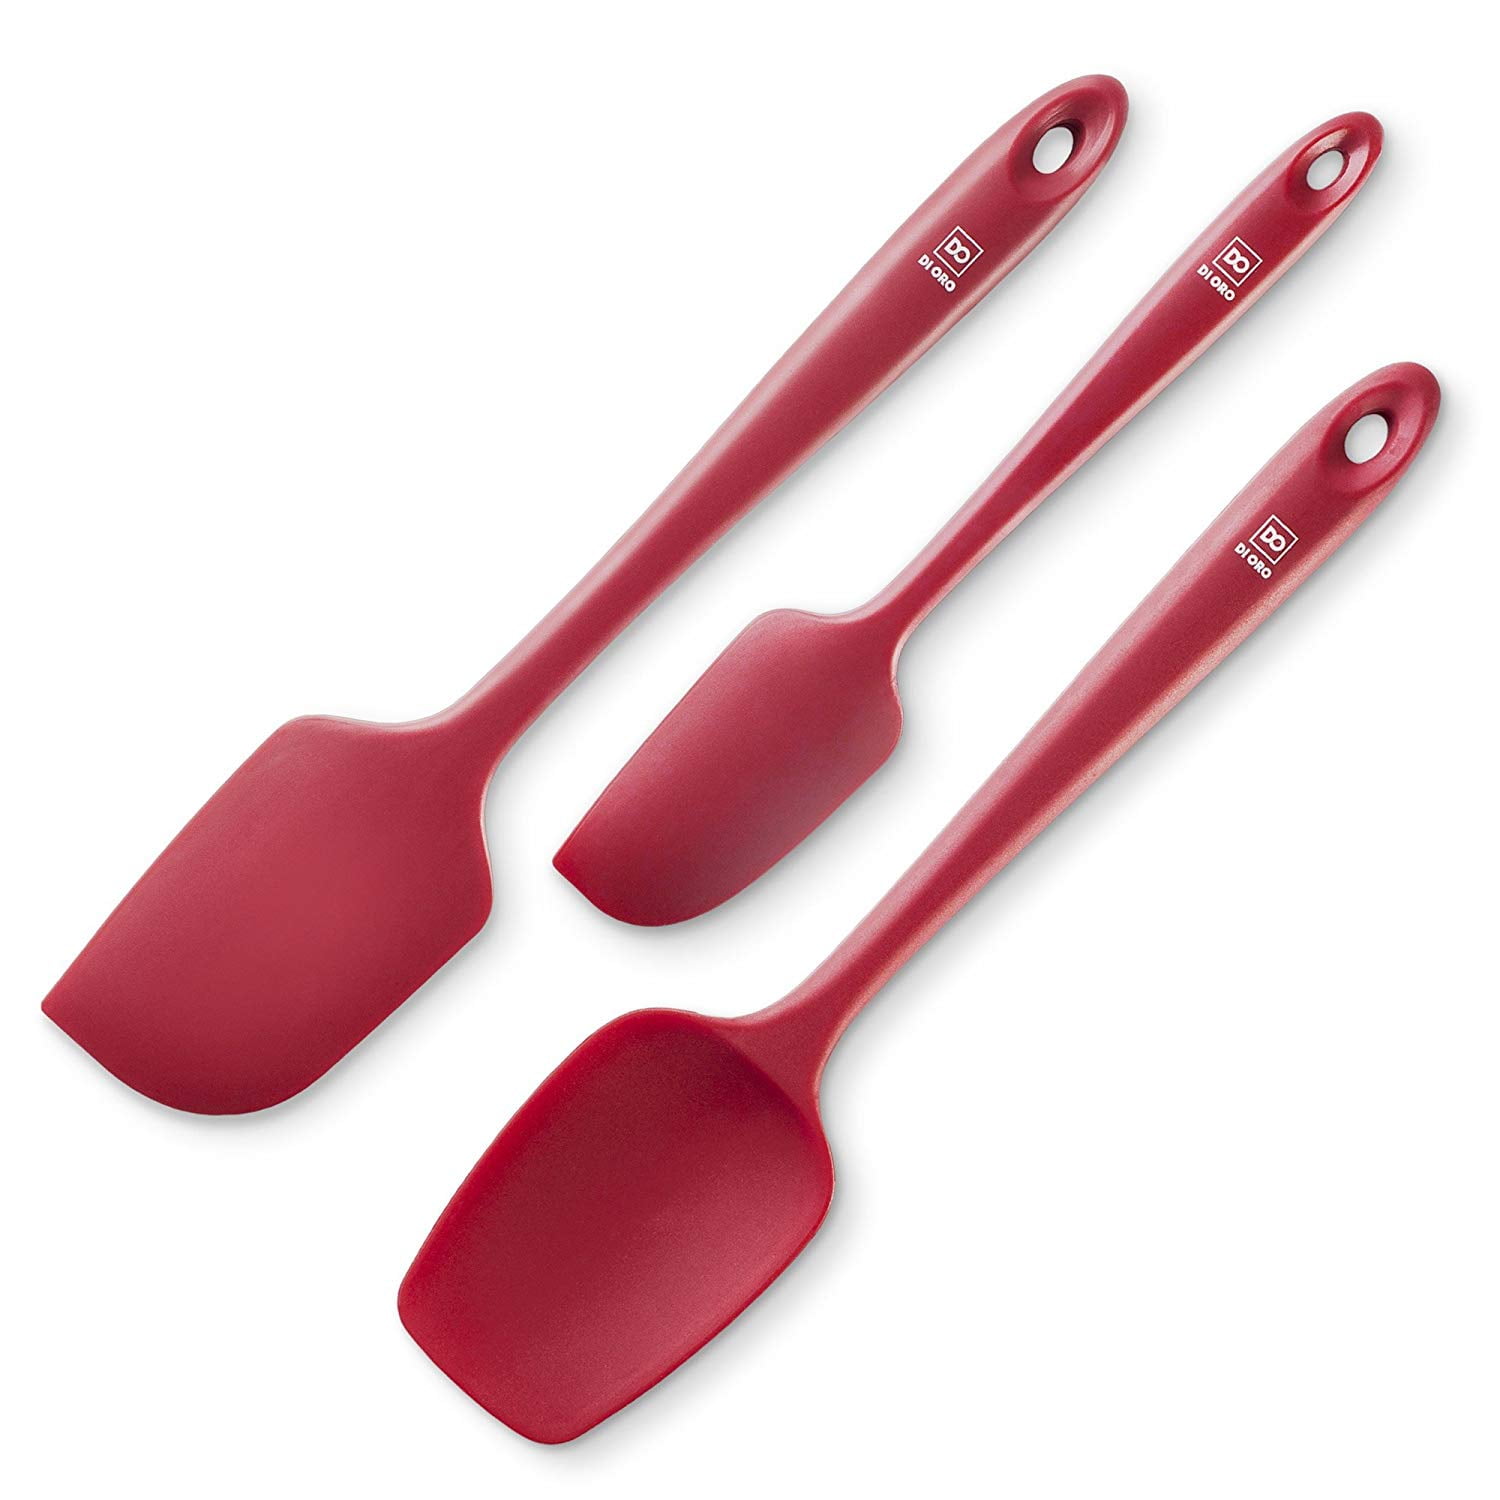 RED Large Silicone Spatula Seamless Design 600ºF Heat-Resistant Spatula DI ORO Pro-Grade Non-Stick Silicone Rubber with Reinforced Stainless Steel S-Core Technology 